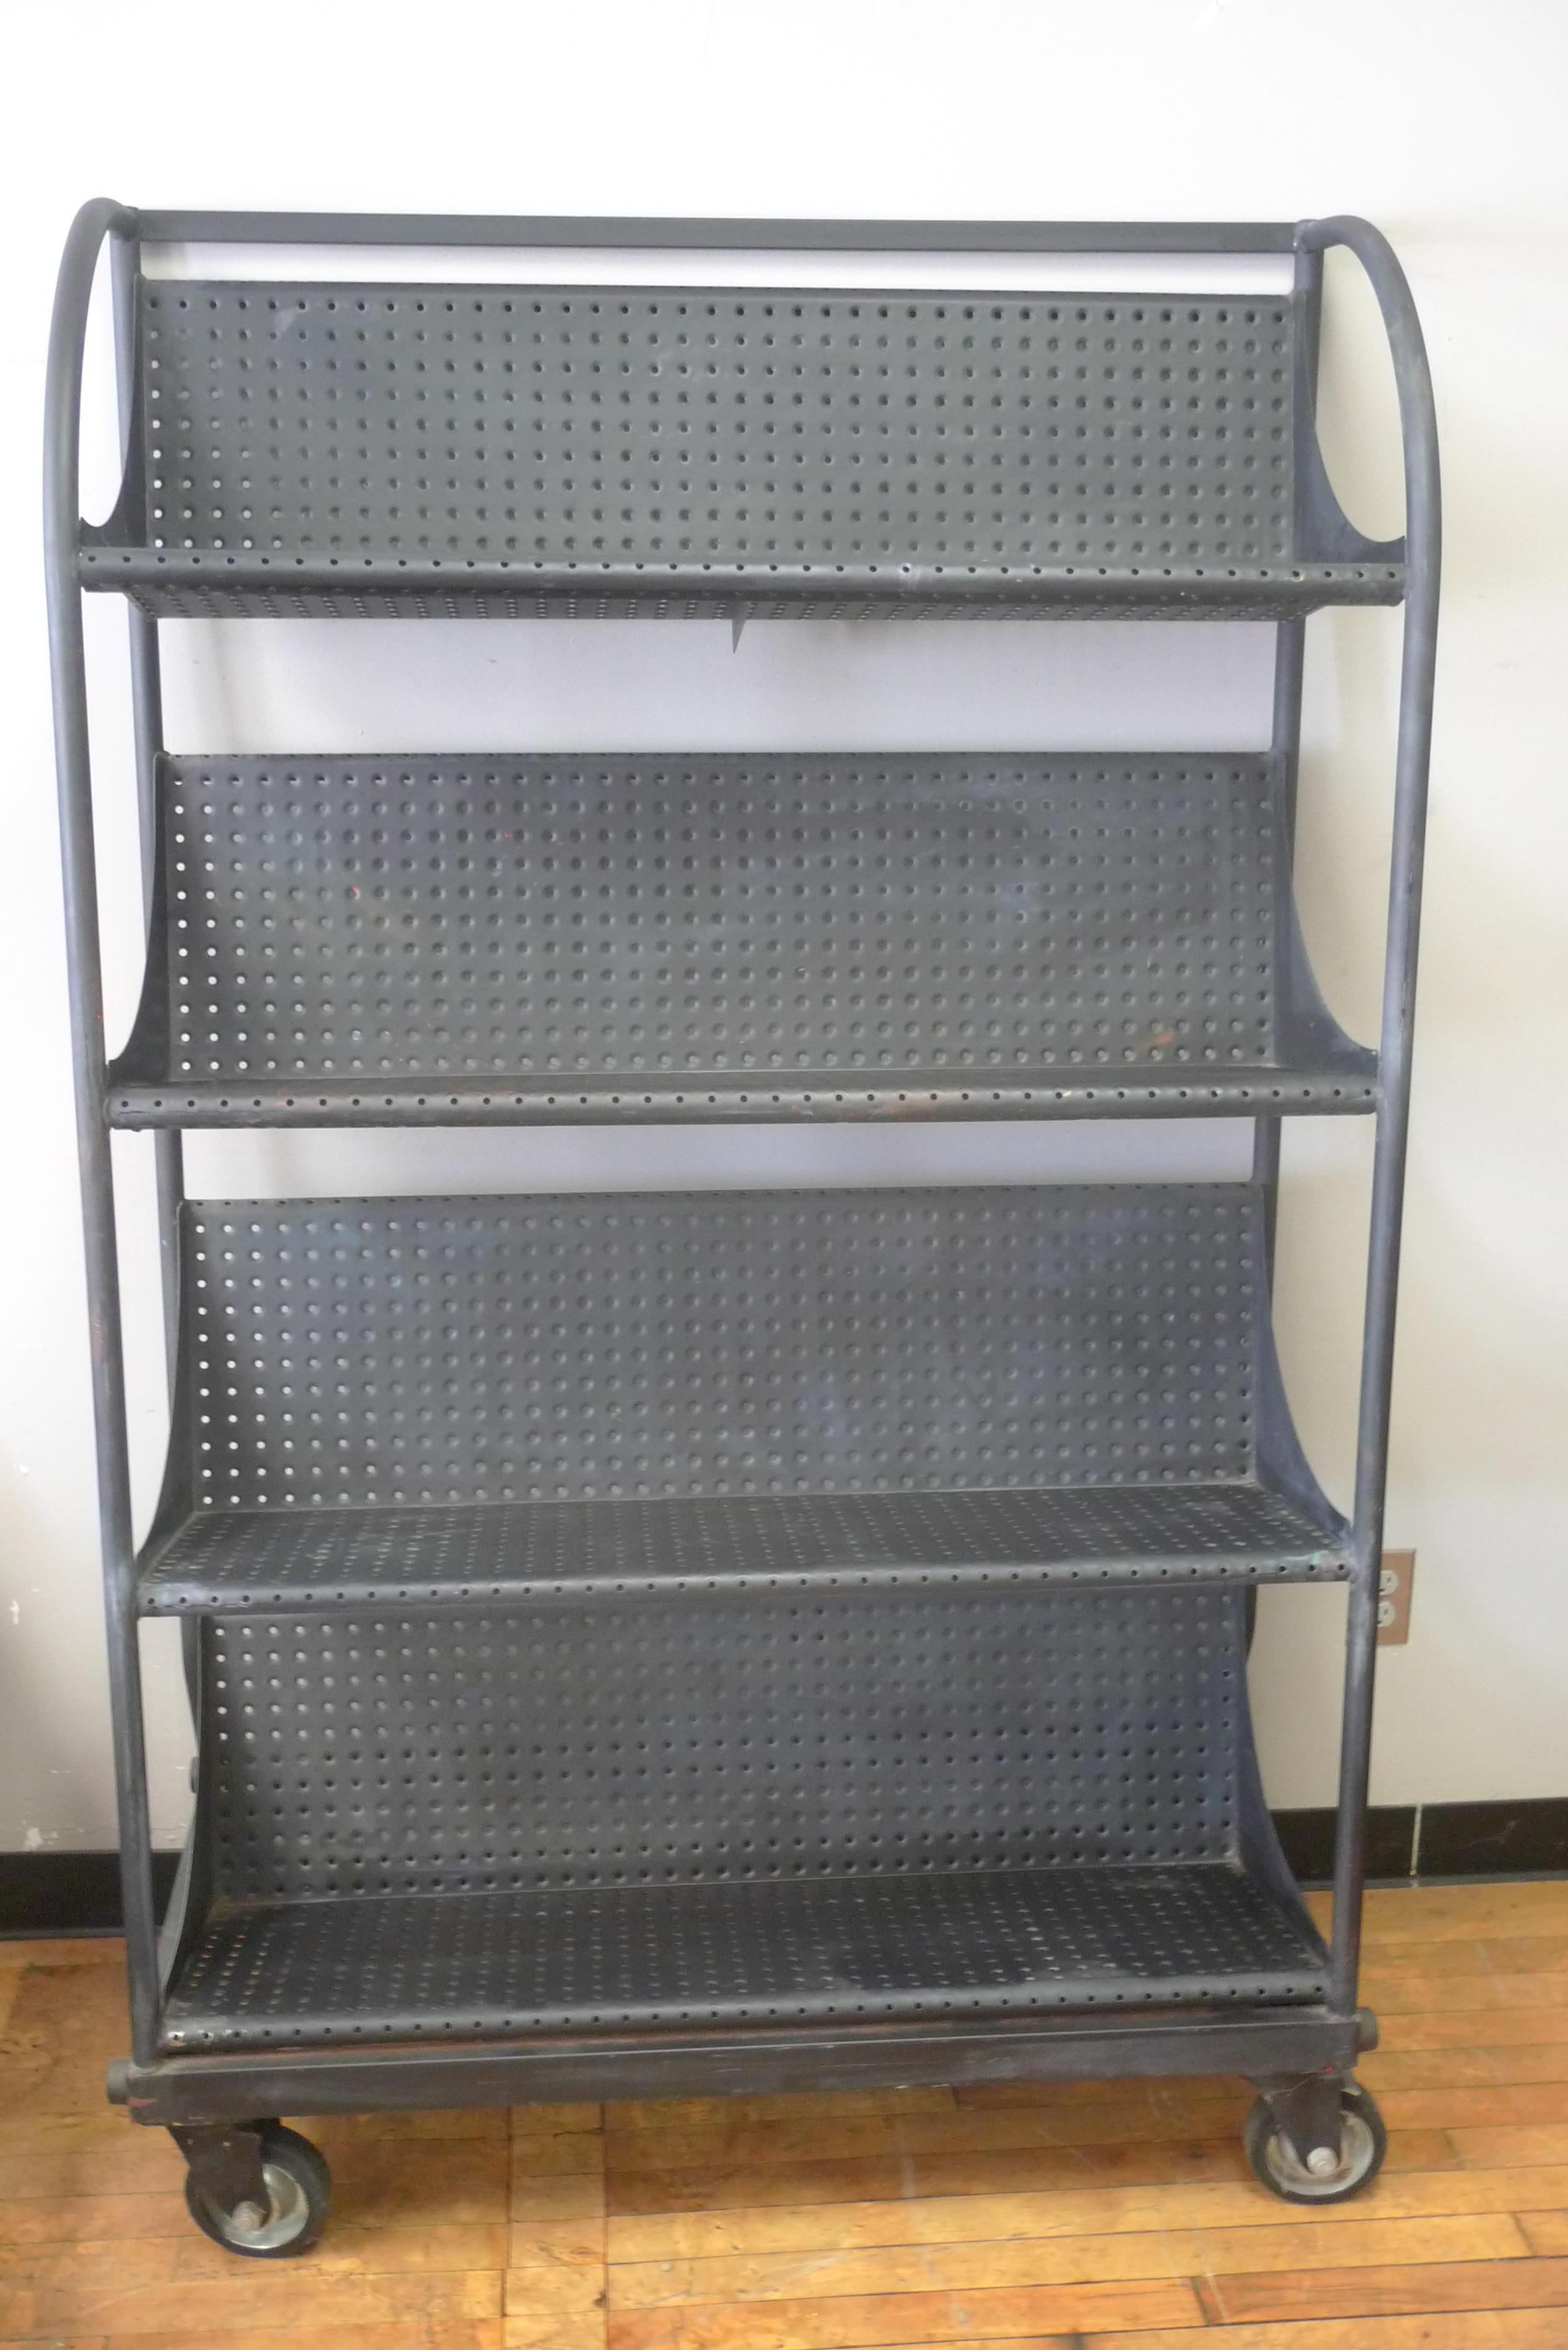 Industrial shelving unit on wheels with perforated steel shelves. Painted an as-found matte black, this unit scoots around nicely on pivoting rubber wheels but but also stands in place securely when wheels are locked. Even has rubber bumper pads to